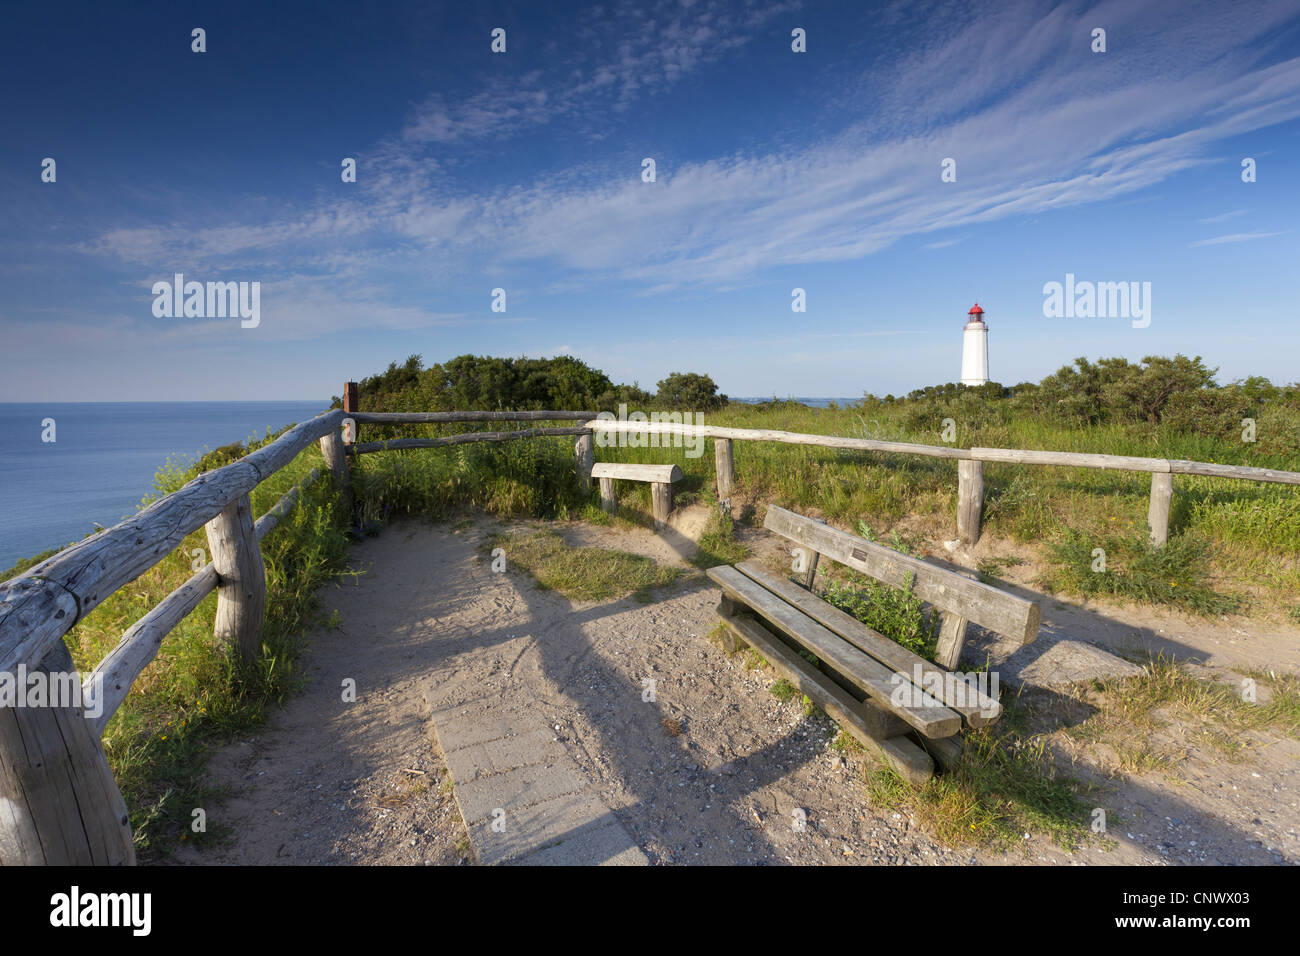 Sonnenuntergang am Strand, viewpoint at the sea with lighthouse in the background, Germany, Mecklenburg-Western Pomerania, Hiddensee, Hiddensee, Kloster Stock Photo